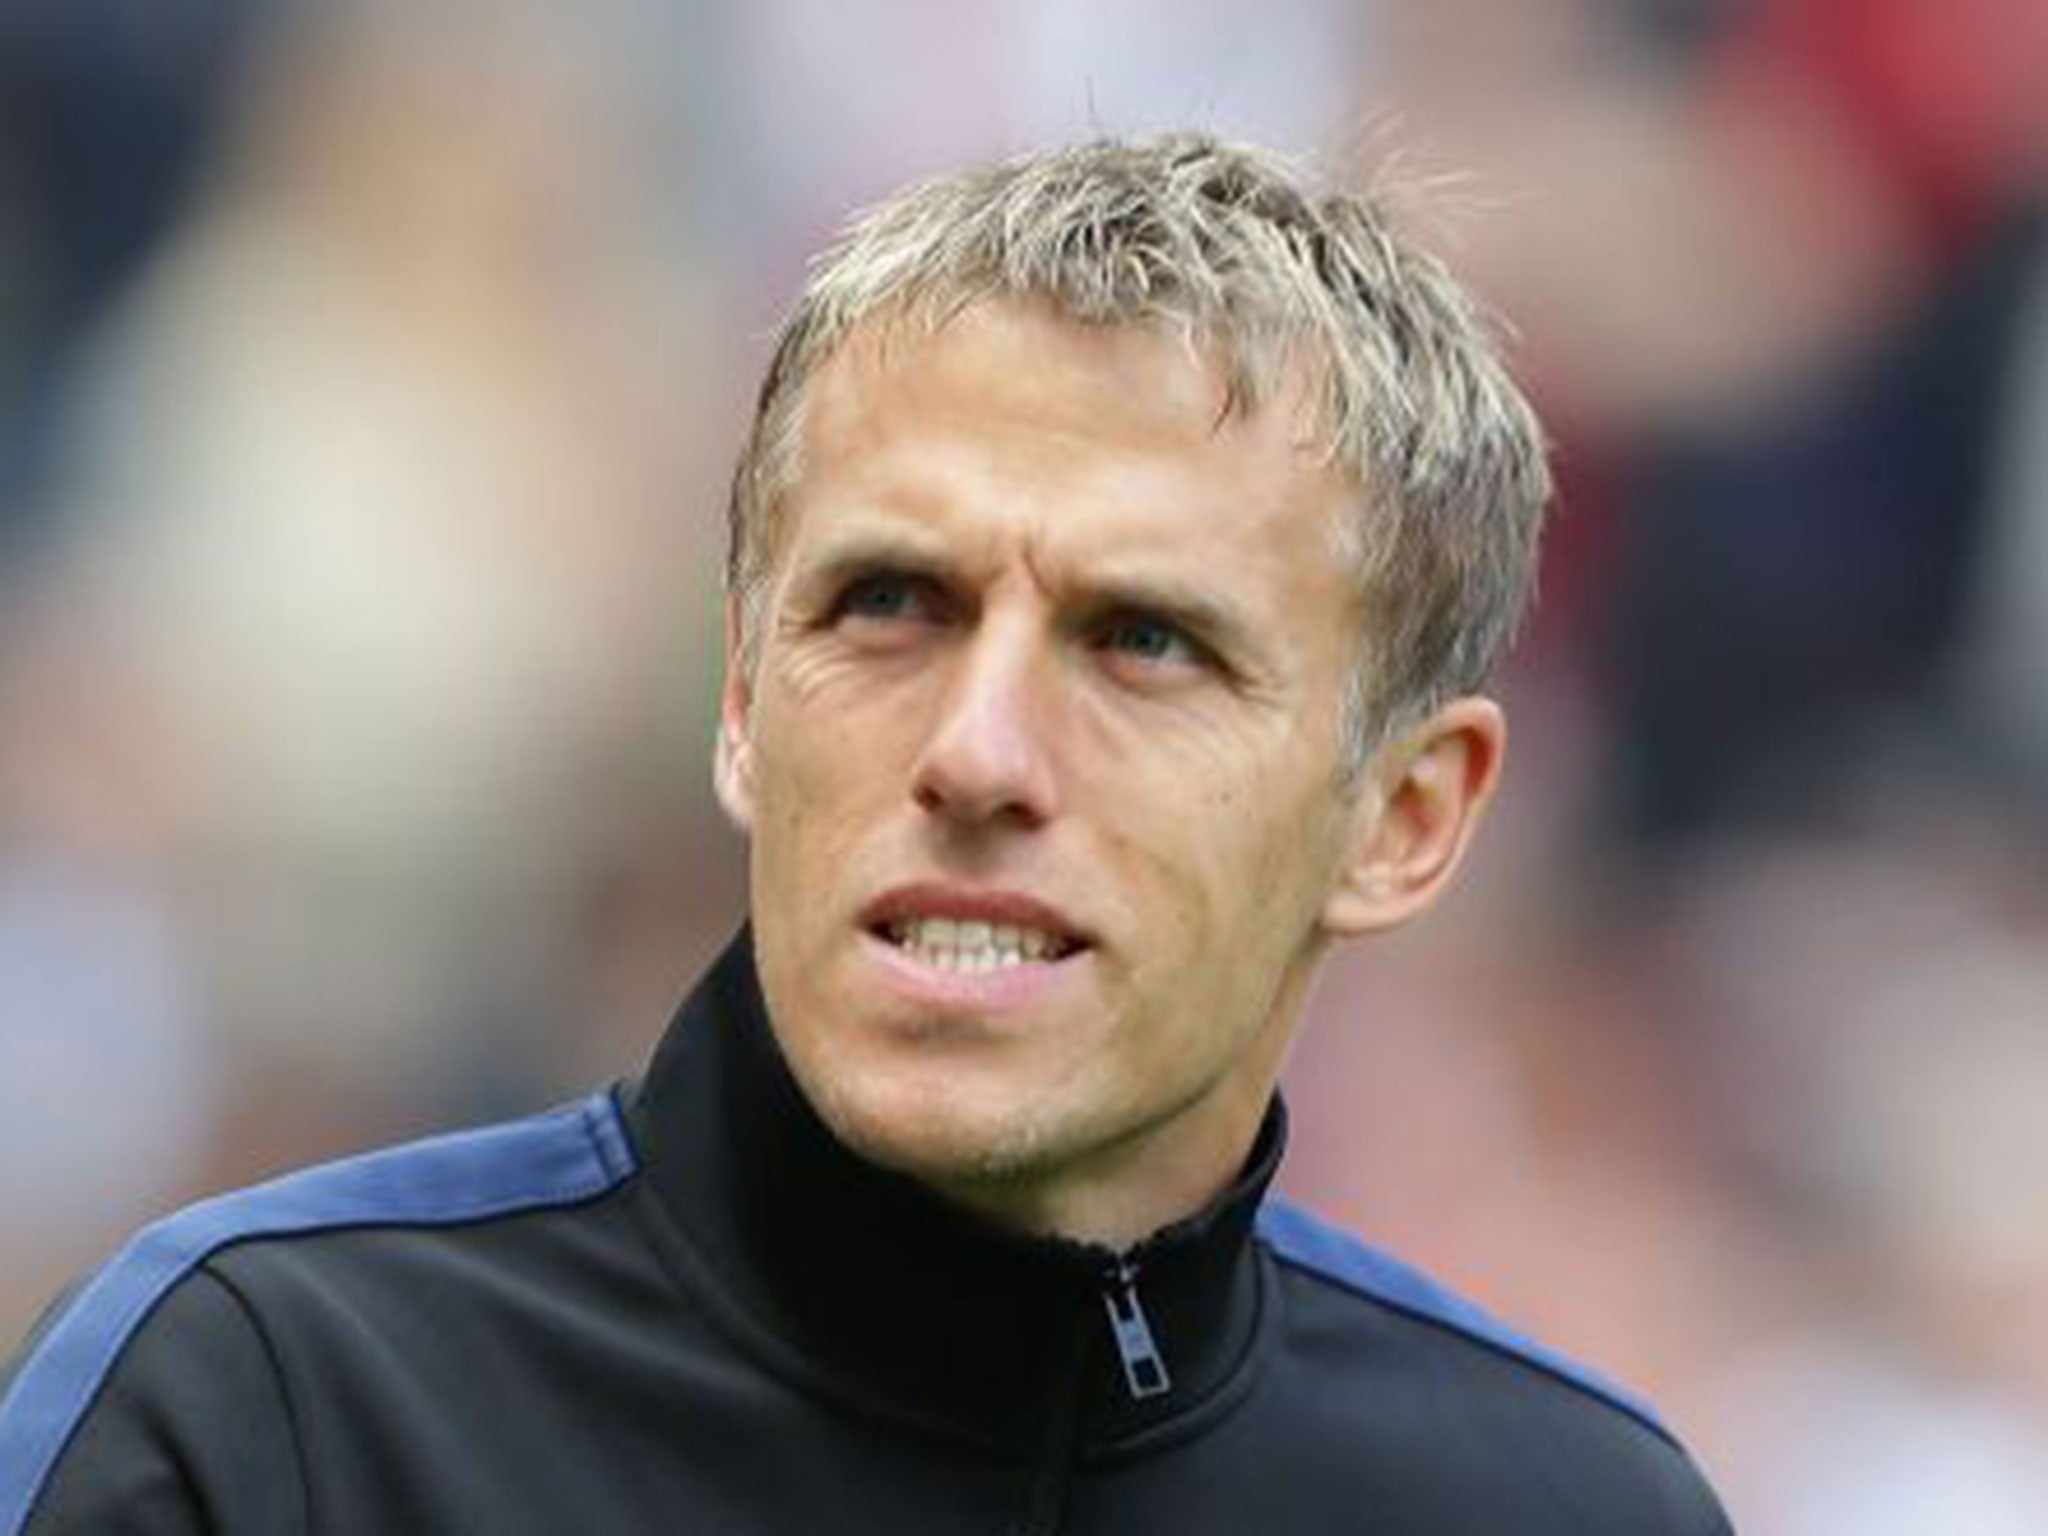 Phil Neville has been a regular on ‘Match of the Day’ since he retired last year